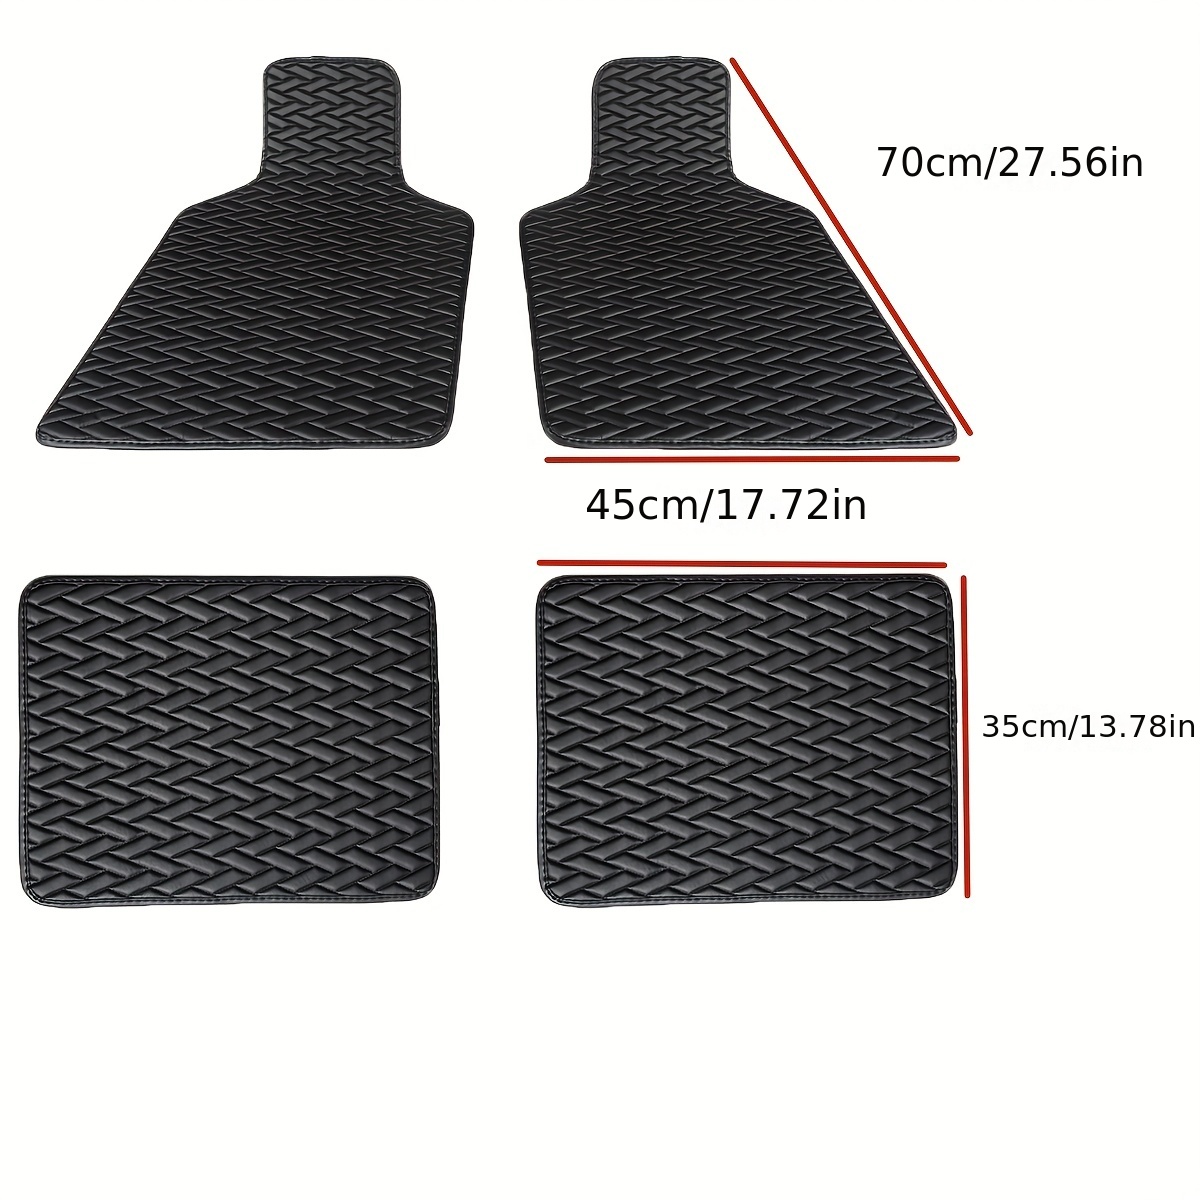 5x Brown PU Leather Car Floor Mats Carpets Universal Interior For 5-Seats  Car